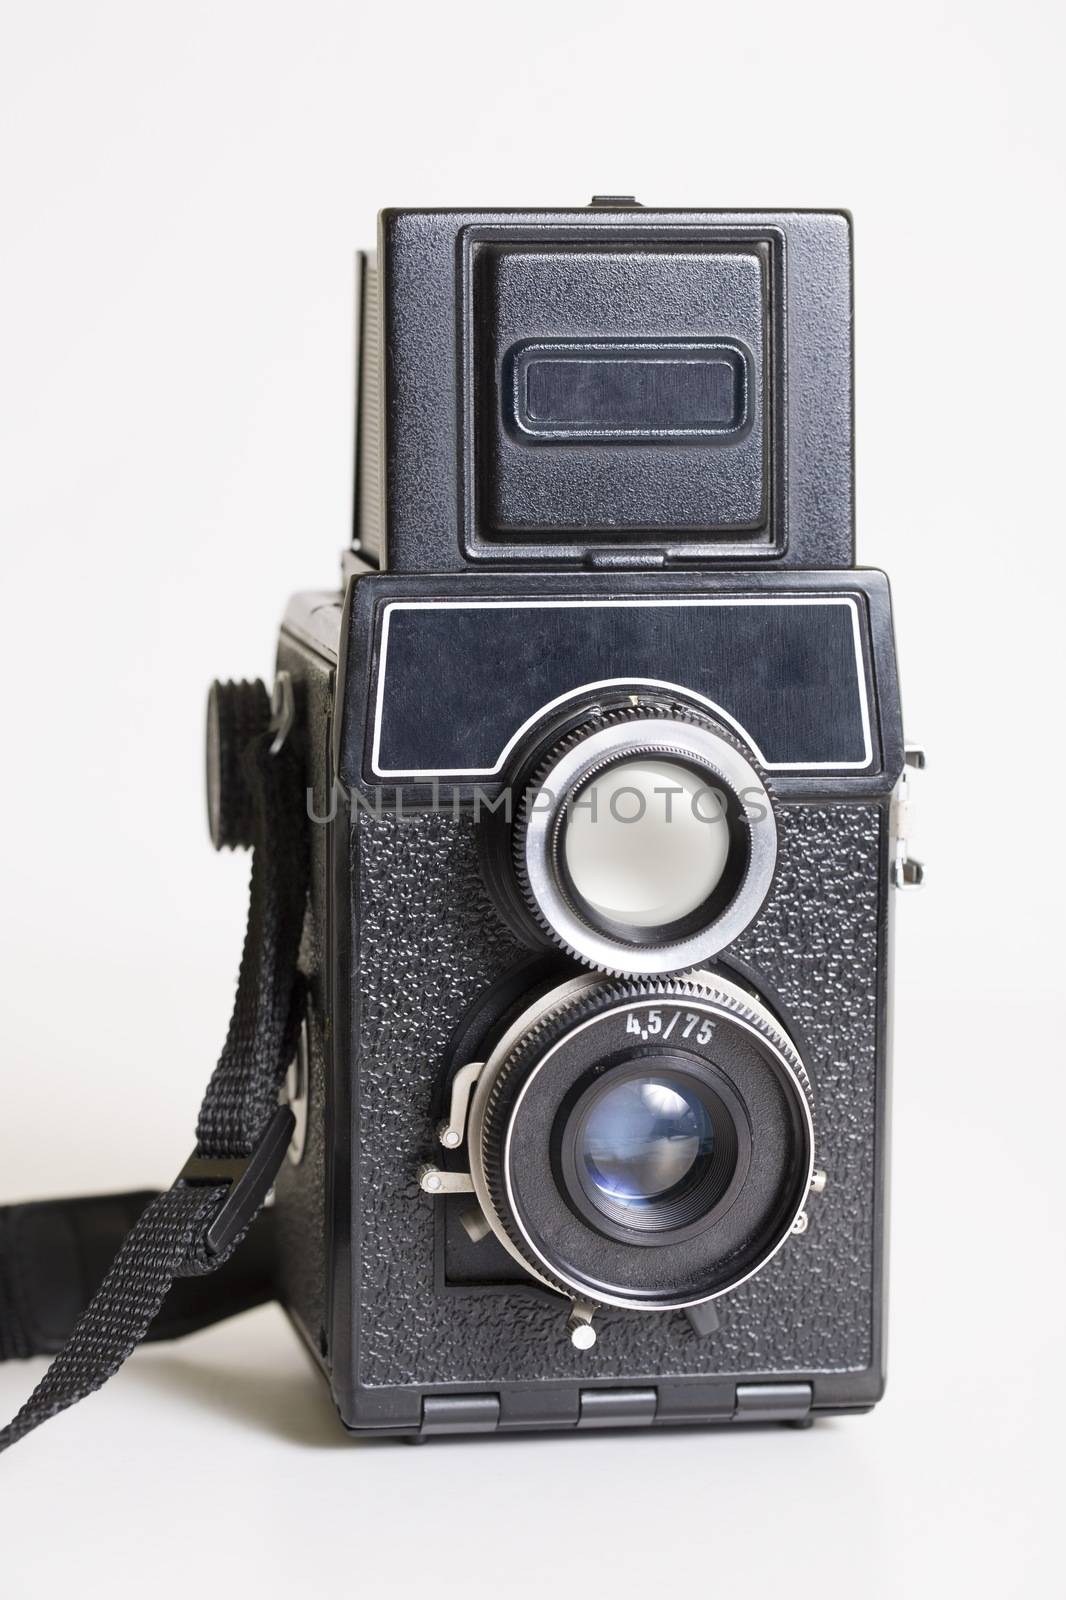 Close-up picture of an old fashoned medium format camera